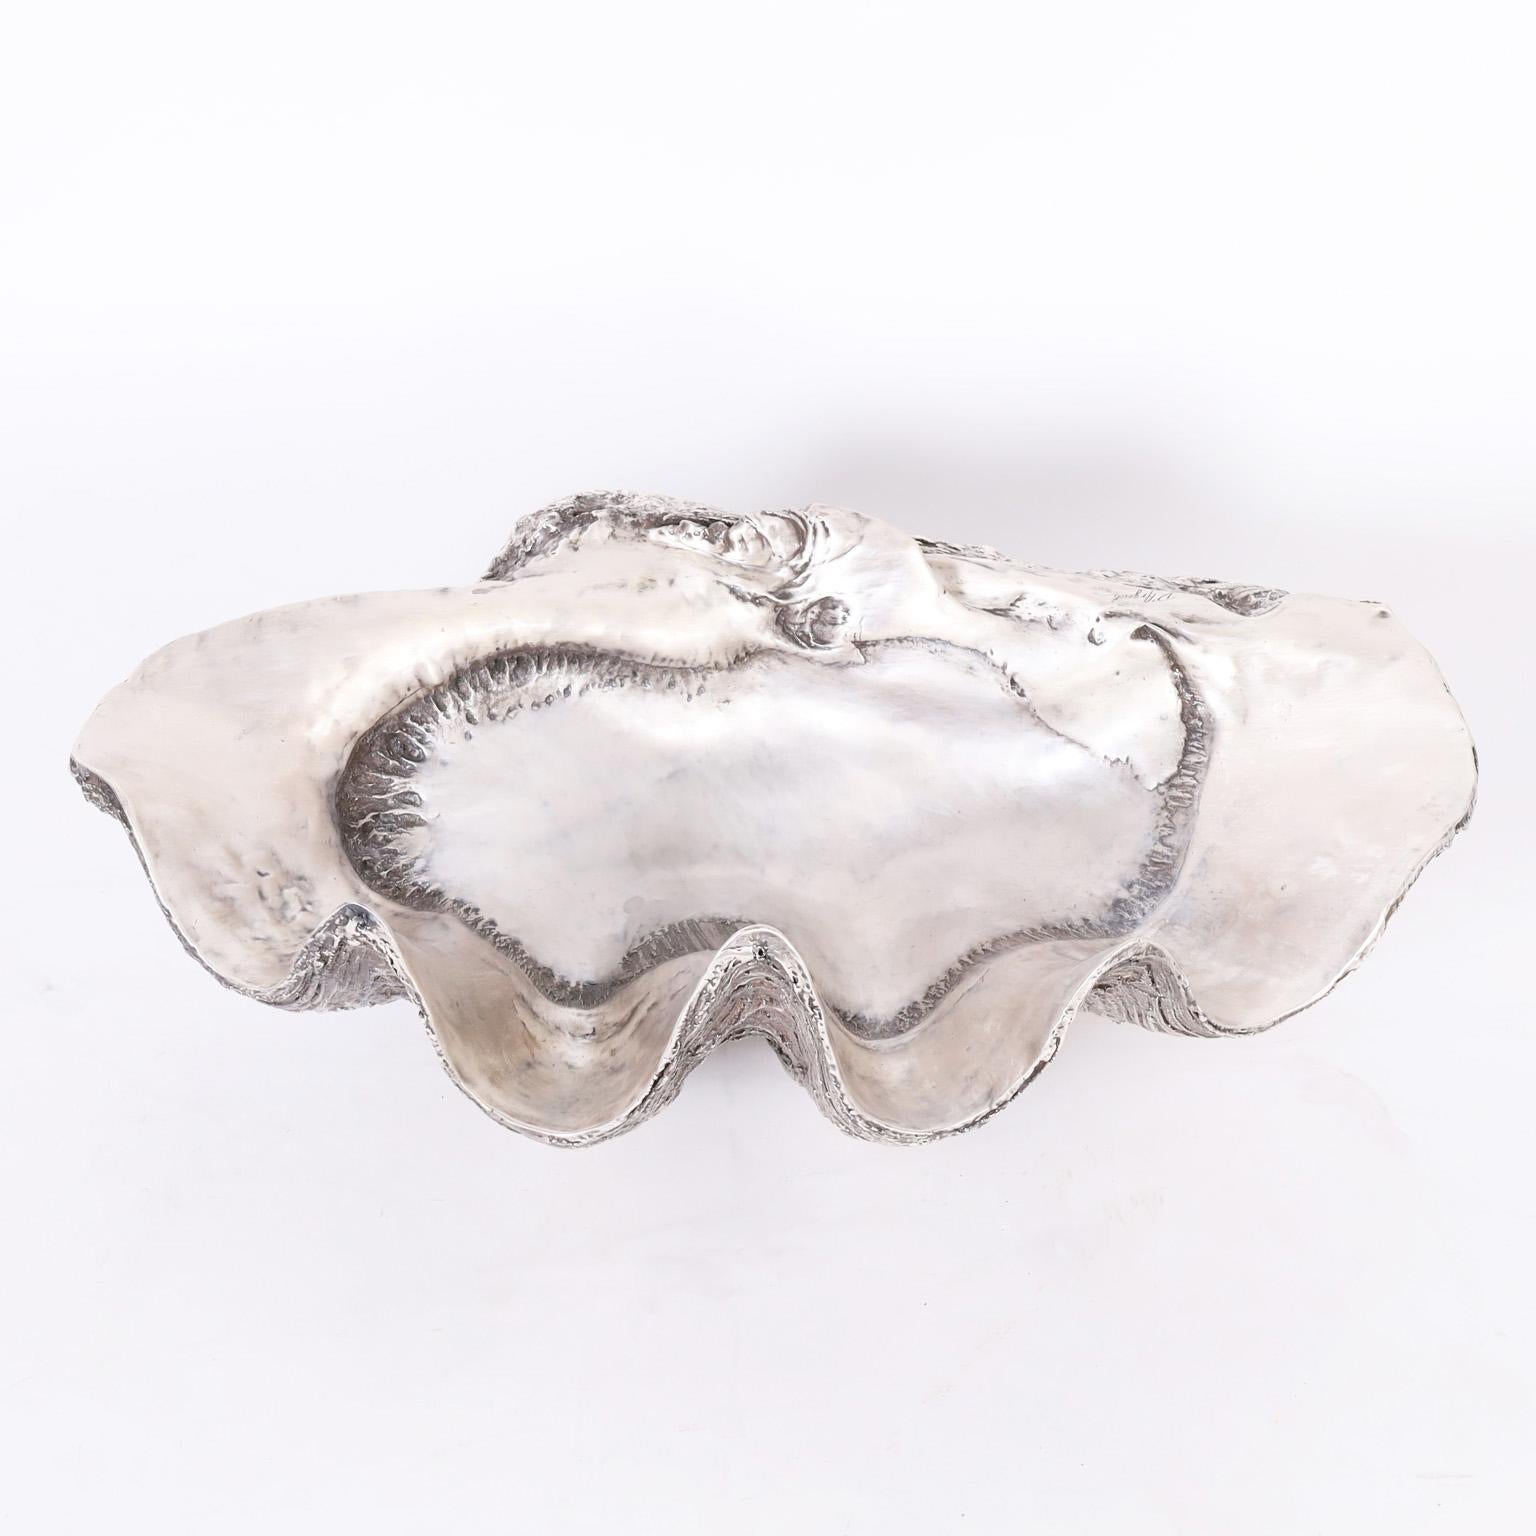 Striking life size giant clam shell sculpture or object of art having the iconic form and texture with a silver plated finish by D'Argenta Studios.